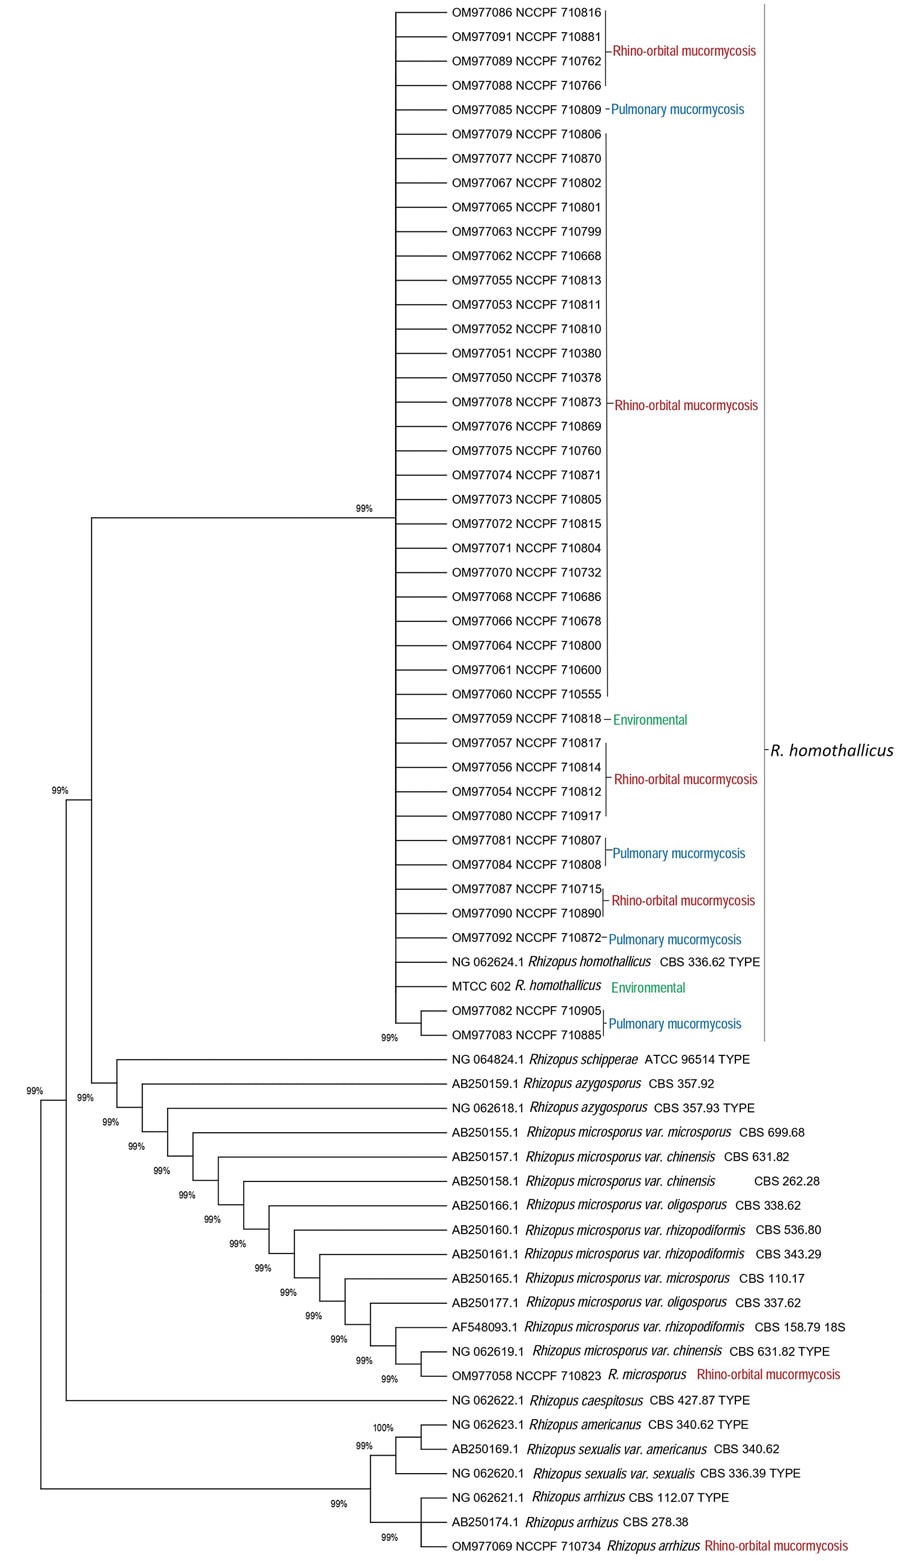 Evolutionary relationships of 40 Rhizopus homothallicus isolates from patients in a 10-month study, Chandigarh, India, January–October 2021, and 2 environmental isolates. GenBank accession numbers of 41 clinical and 1 environmental–MTCC 602 isolate of R. homothallicus from India are shown. Tree generated using neighbor-joining algorithm with 1,000 bootstrap replicates.